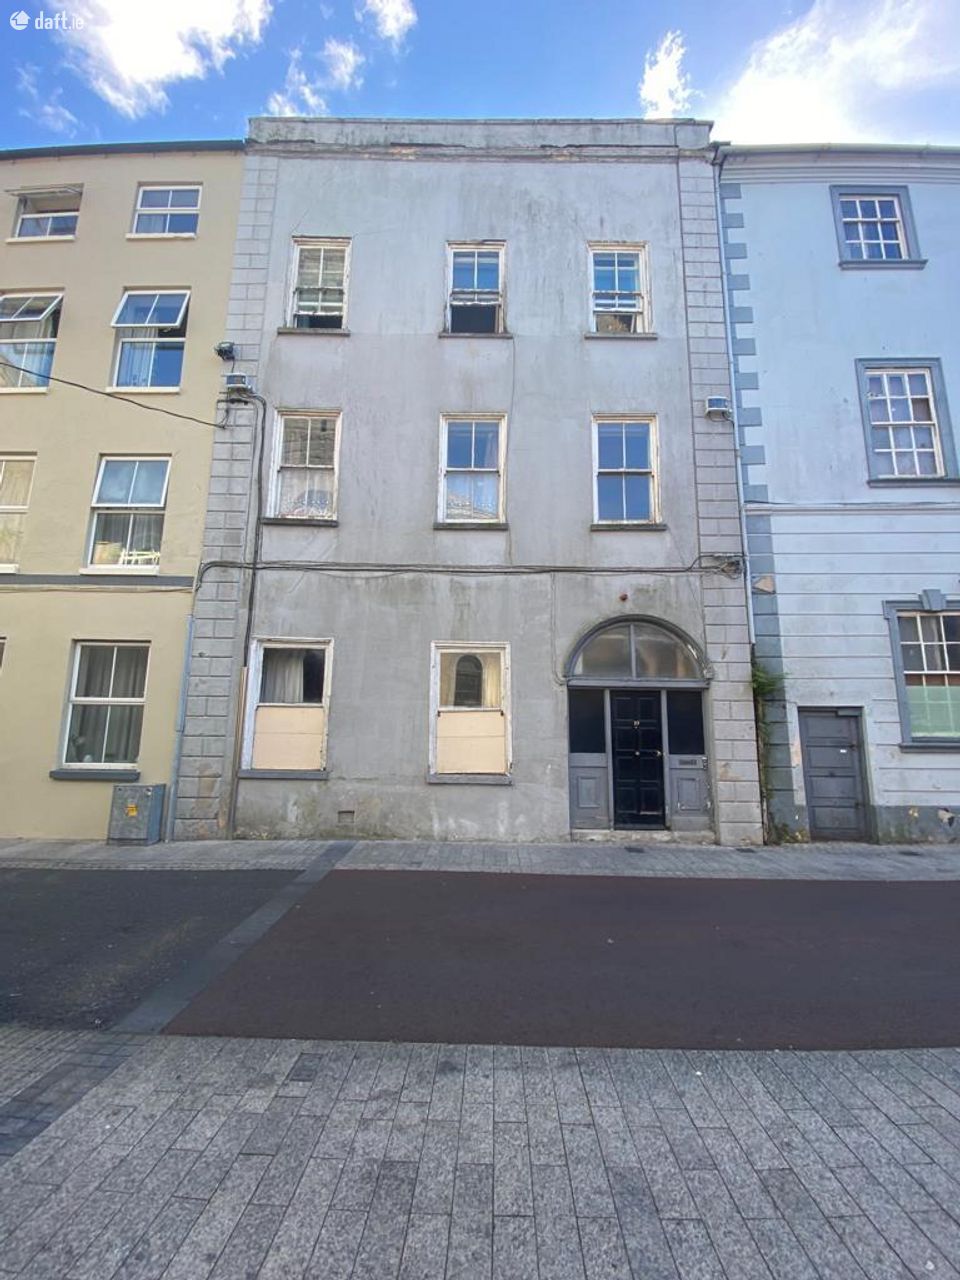 19 Lady Lane, Waterford City Centre, Co. Waterford